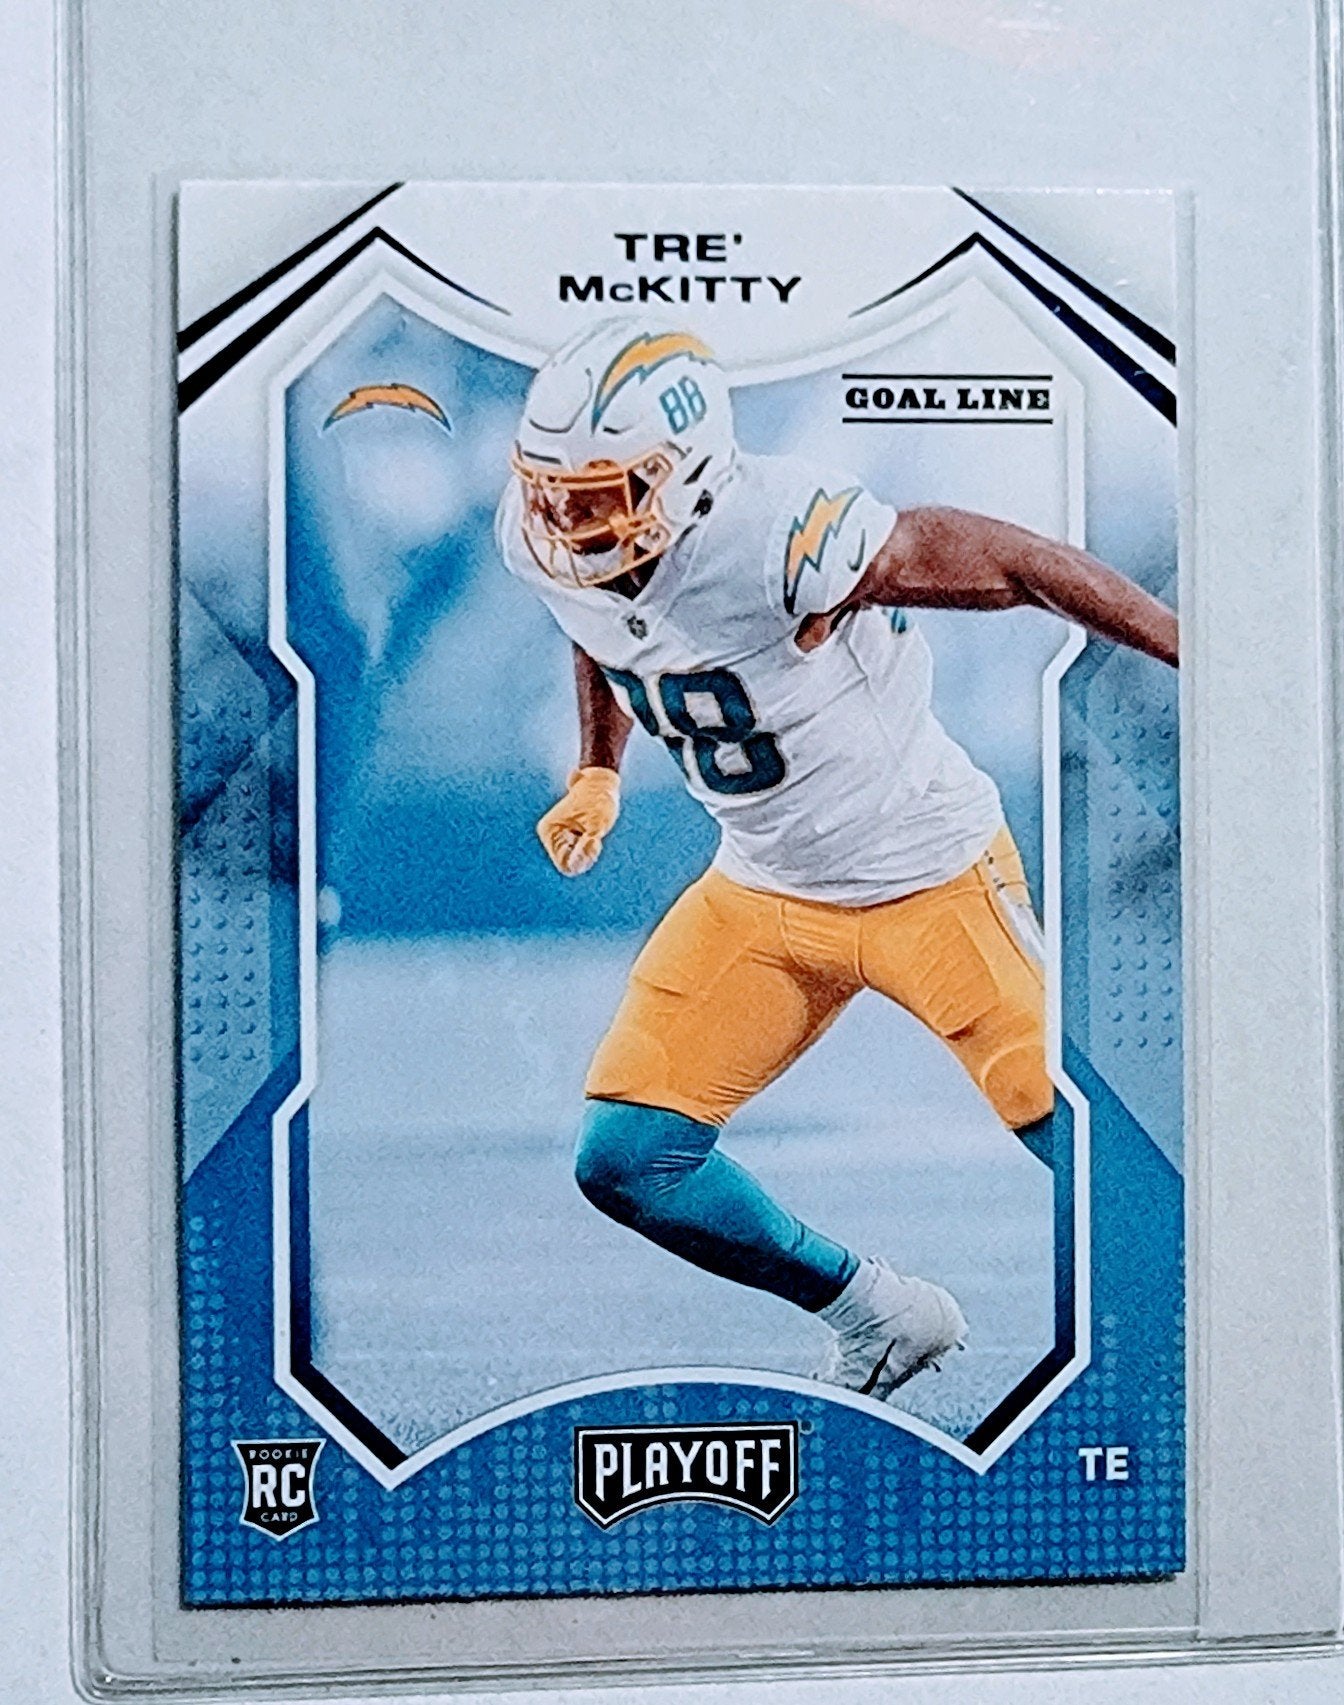 2021 Panini Playoffs Tre McKitty Goal Line Football Card AVM1 simple Xclusive Collectibles   